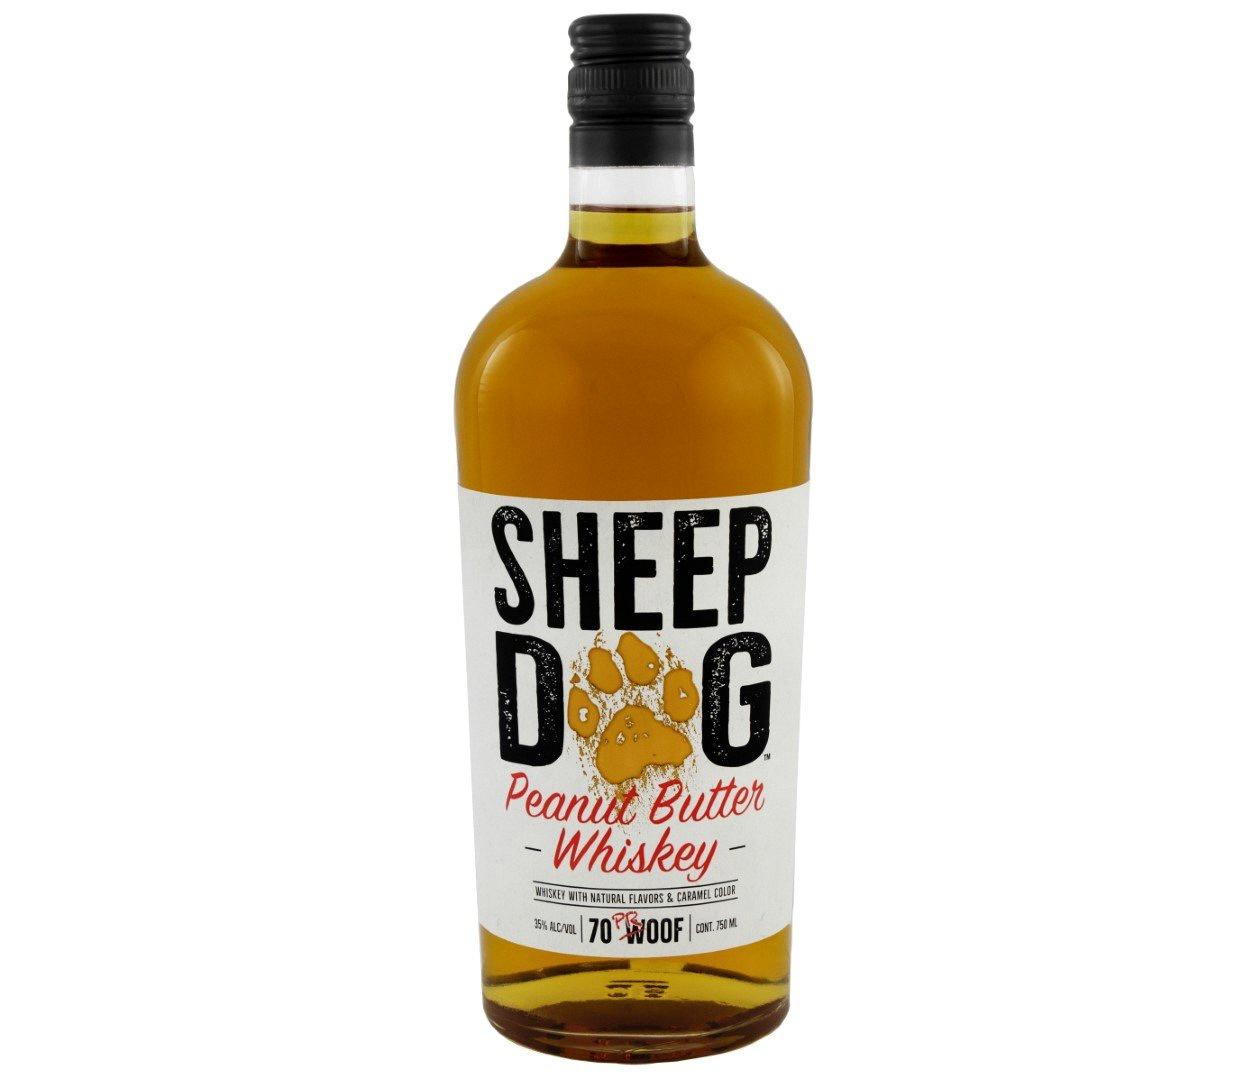 sheep dog peanut butter whiskey review